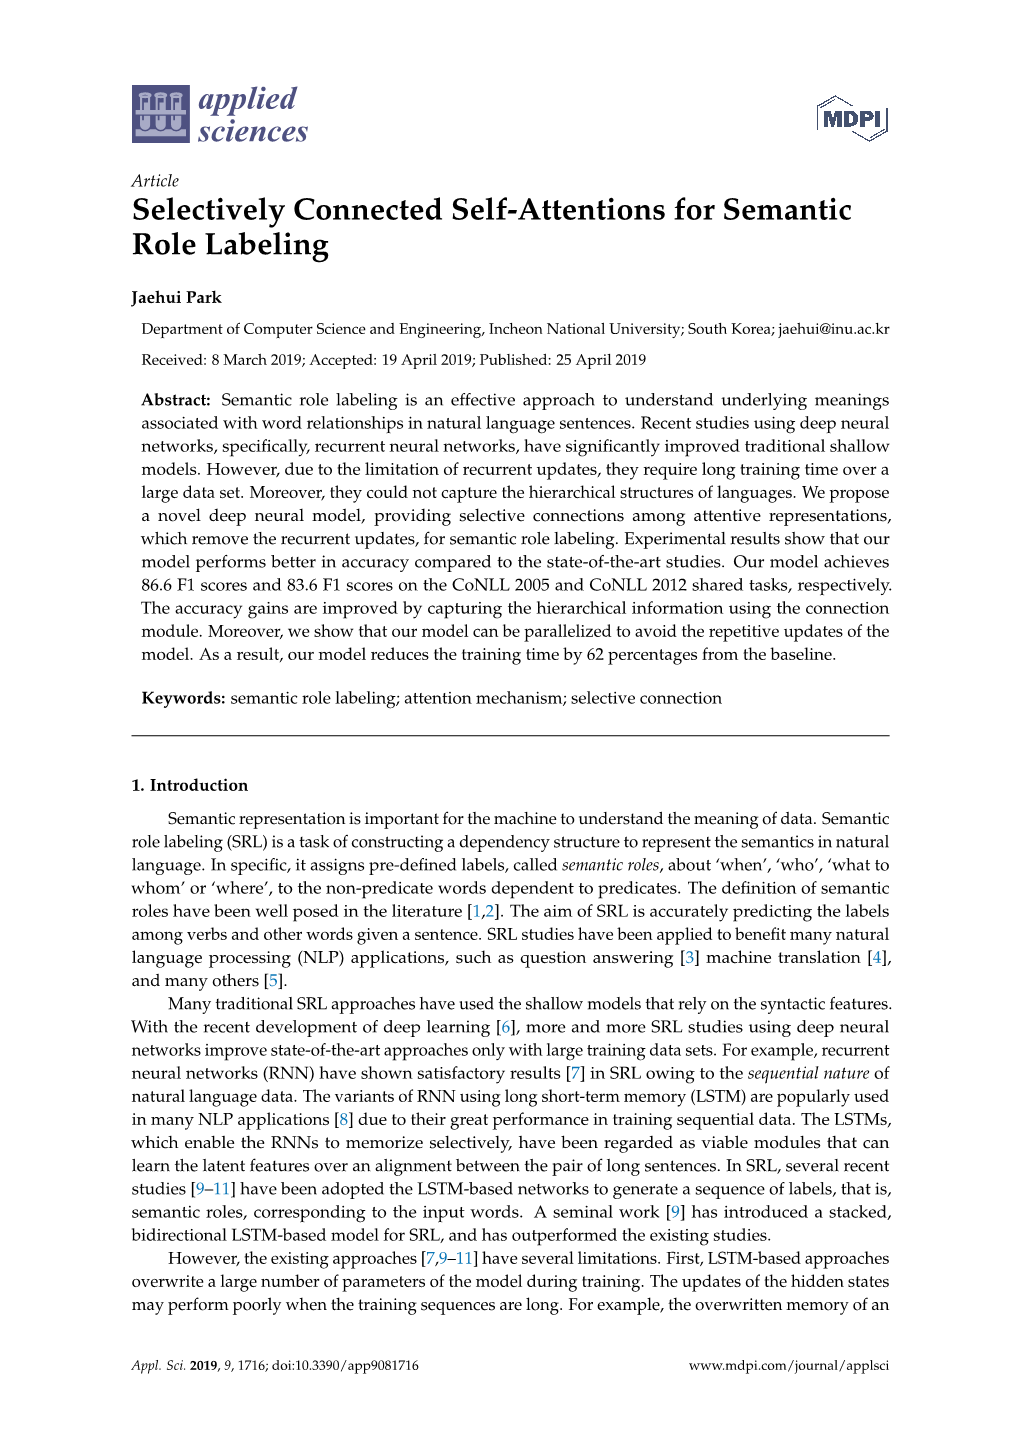 Selectively Connected Self-Attentions for Semantic Role Labeling